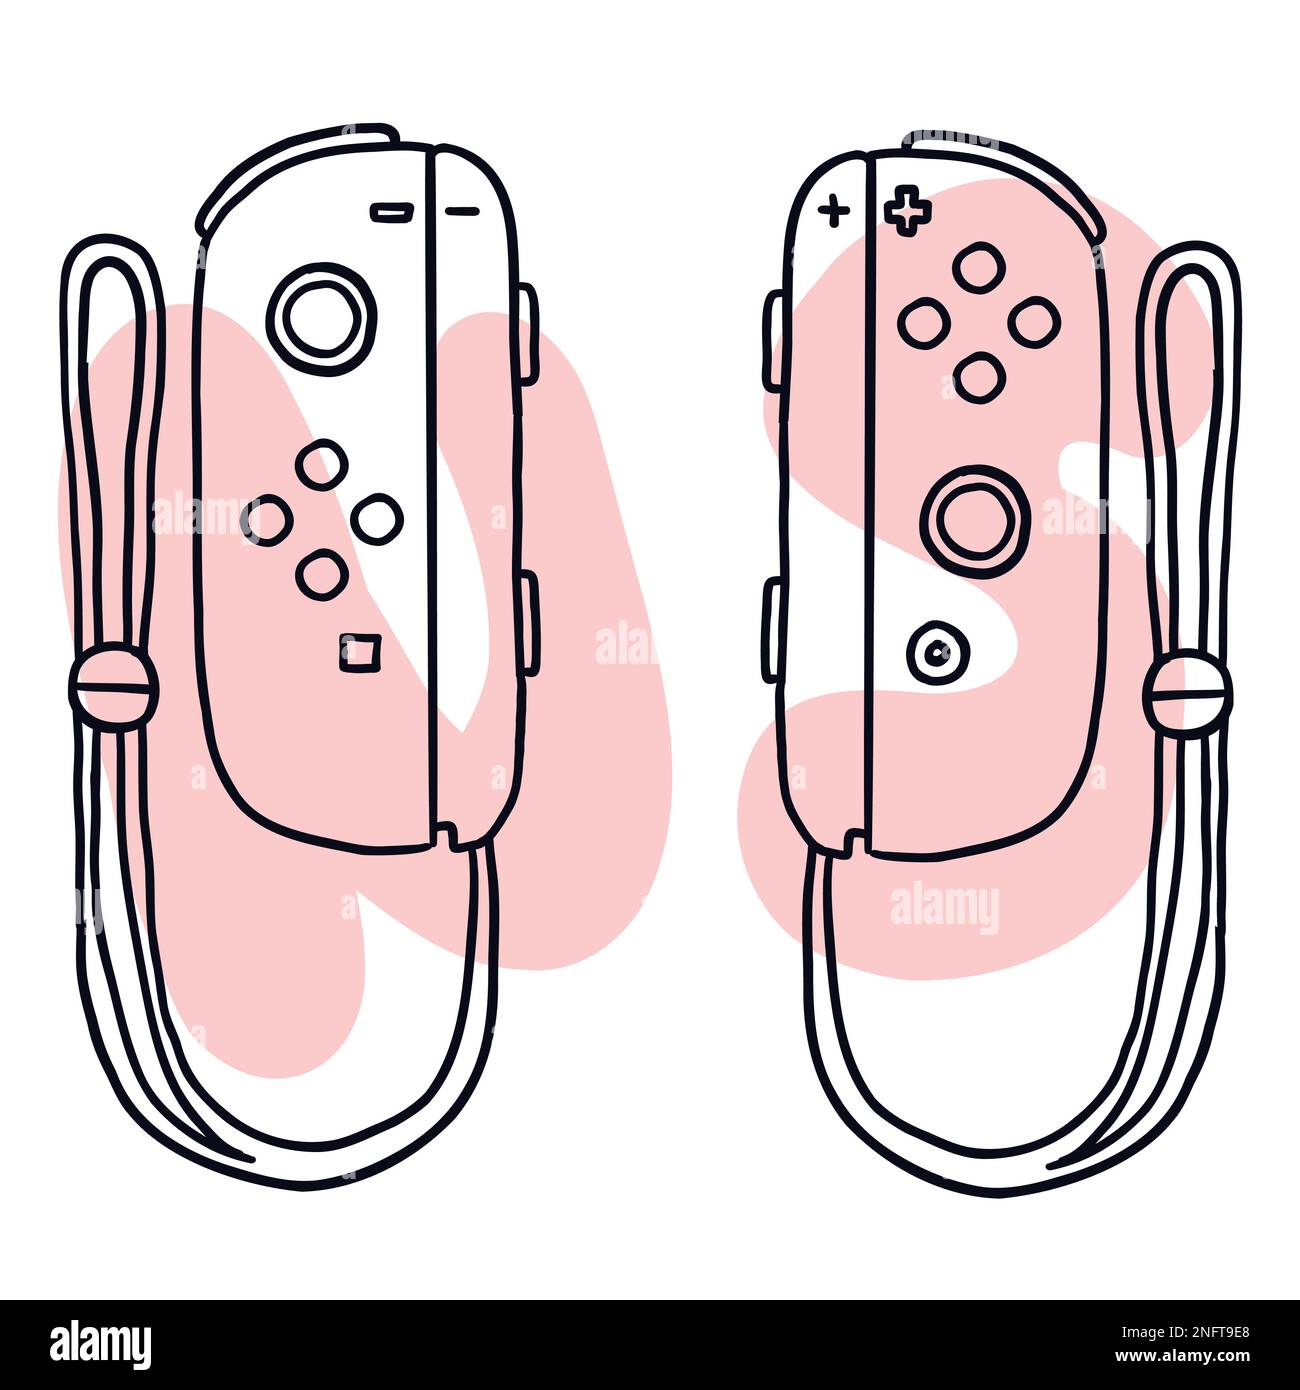 Game modern controller. Vector illustration in hand-drawn cartoon flat style isolated on white background. Stock Vector